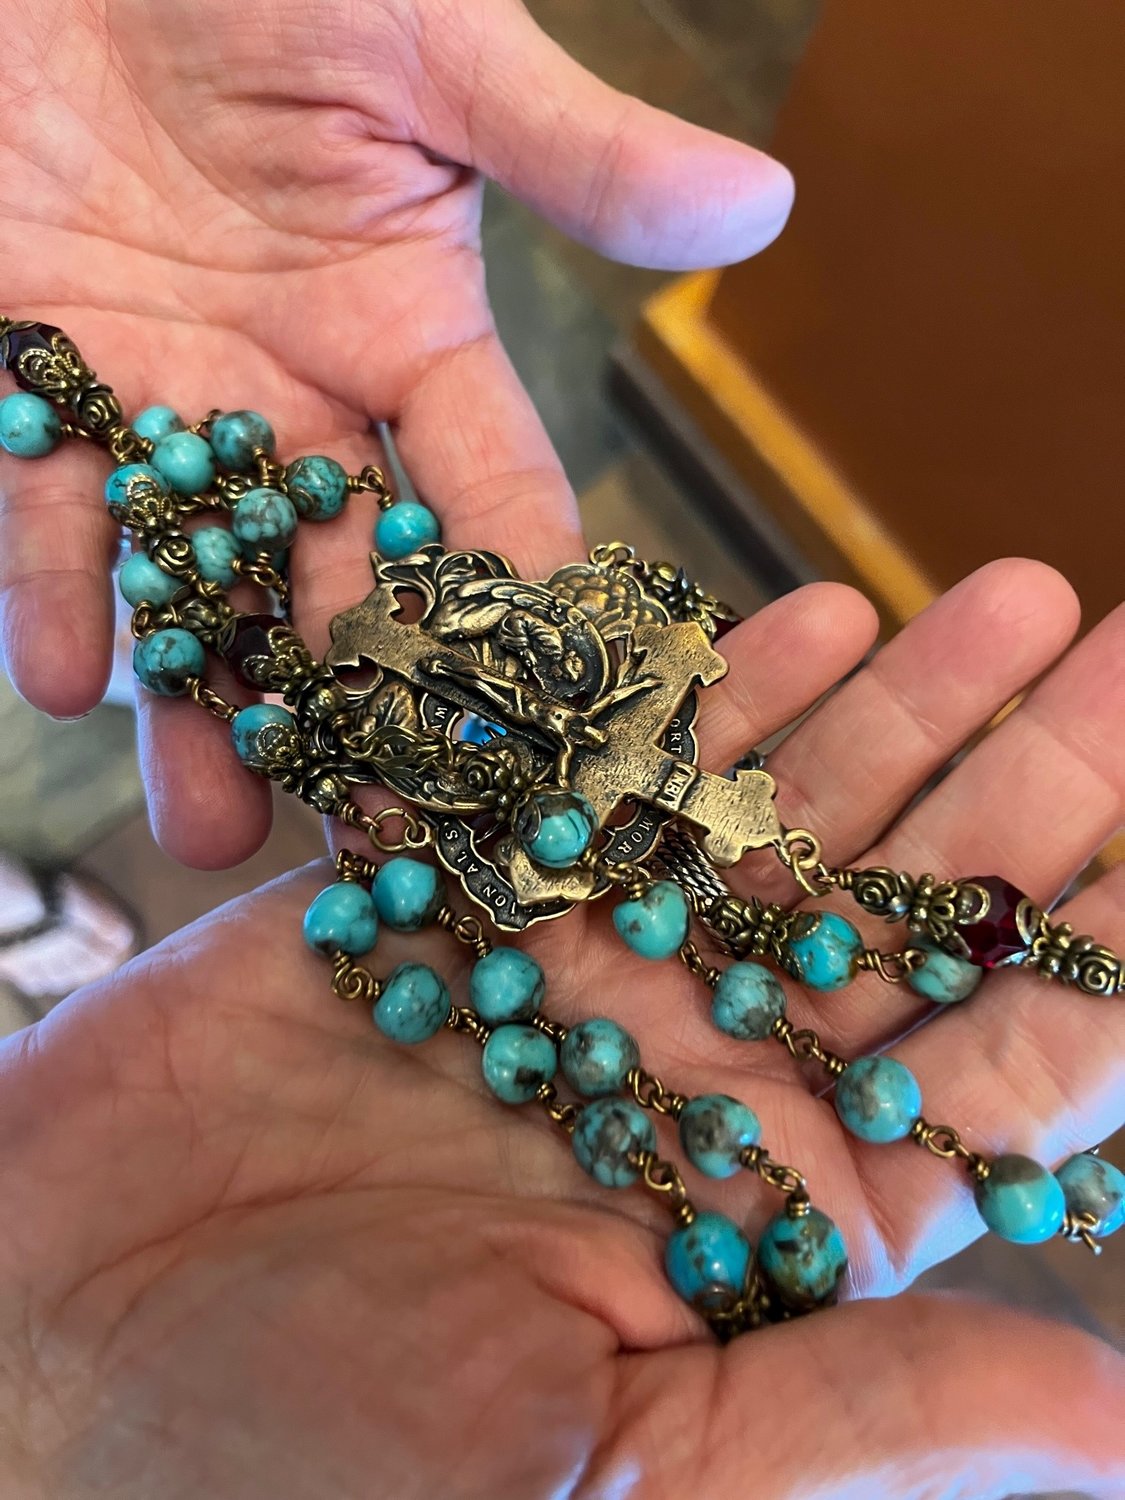 This rosary chain, custom made for Lupe Rodriguez-Jaramillo, is identical to the one she had made several years ago by an artisan in Santa Fe. When it was made, she had lots of extra turquoise left over and, “for some reason, I hung onto the extra,” she said. When her son, SFC Antonio Rey Rodriguez, died in combat in Afghanistan in 2020, she wanted him to be buried with the original rosary. She later took the extra turquoise back to the artisan, who crafted this duplicate, which she carries with her constantly. A golf tournament takes place today at New Mexico State University Golf Course, a fundraiser for Rodriguez’s memorial scholarship and foundation, the Antonio Rey Rodriguez Foundation, www.arrfoundation.org.